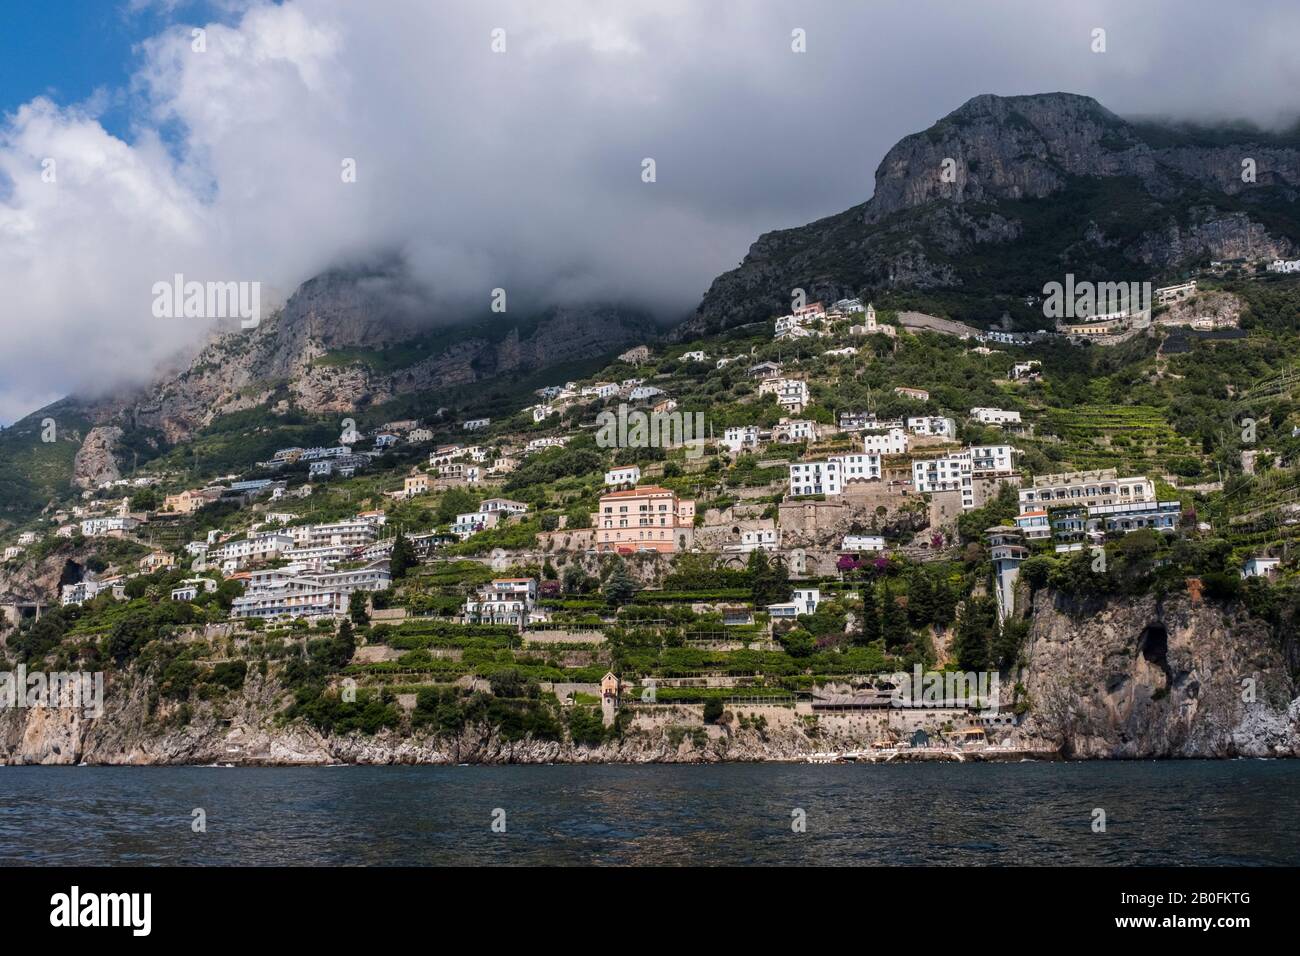 View of the Amalfi Coast, mountains and clouds seen from the sea along the Italian coastline. Stock Photo